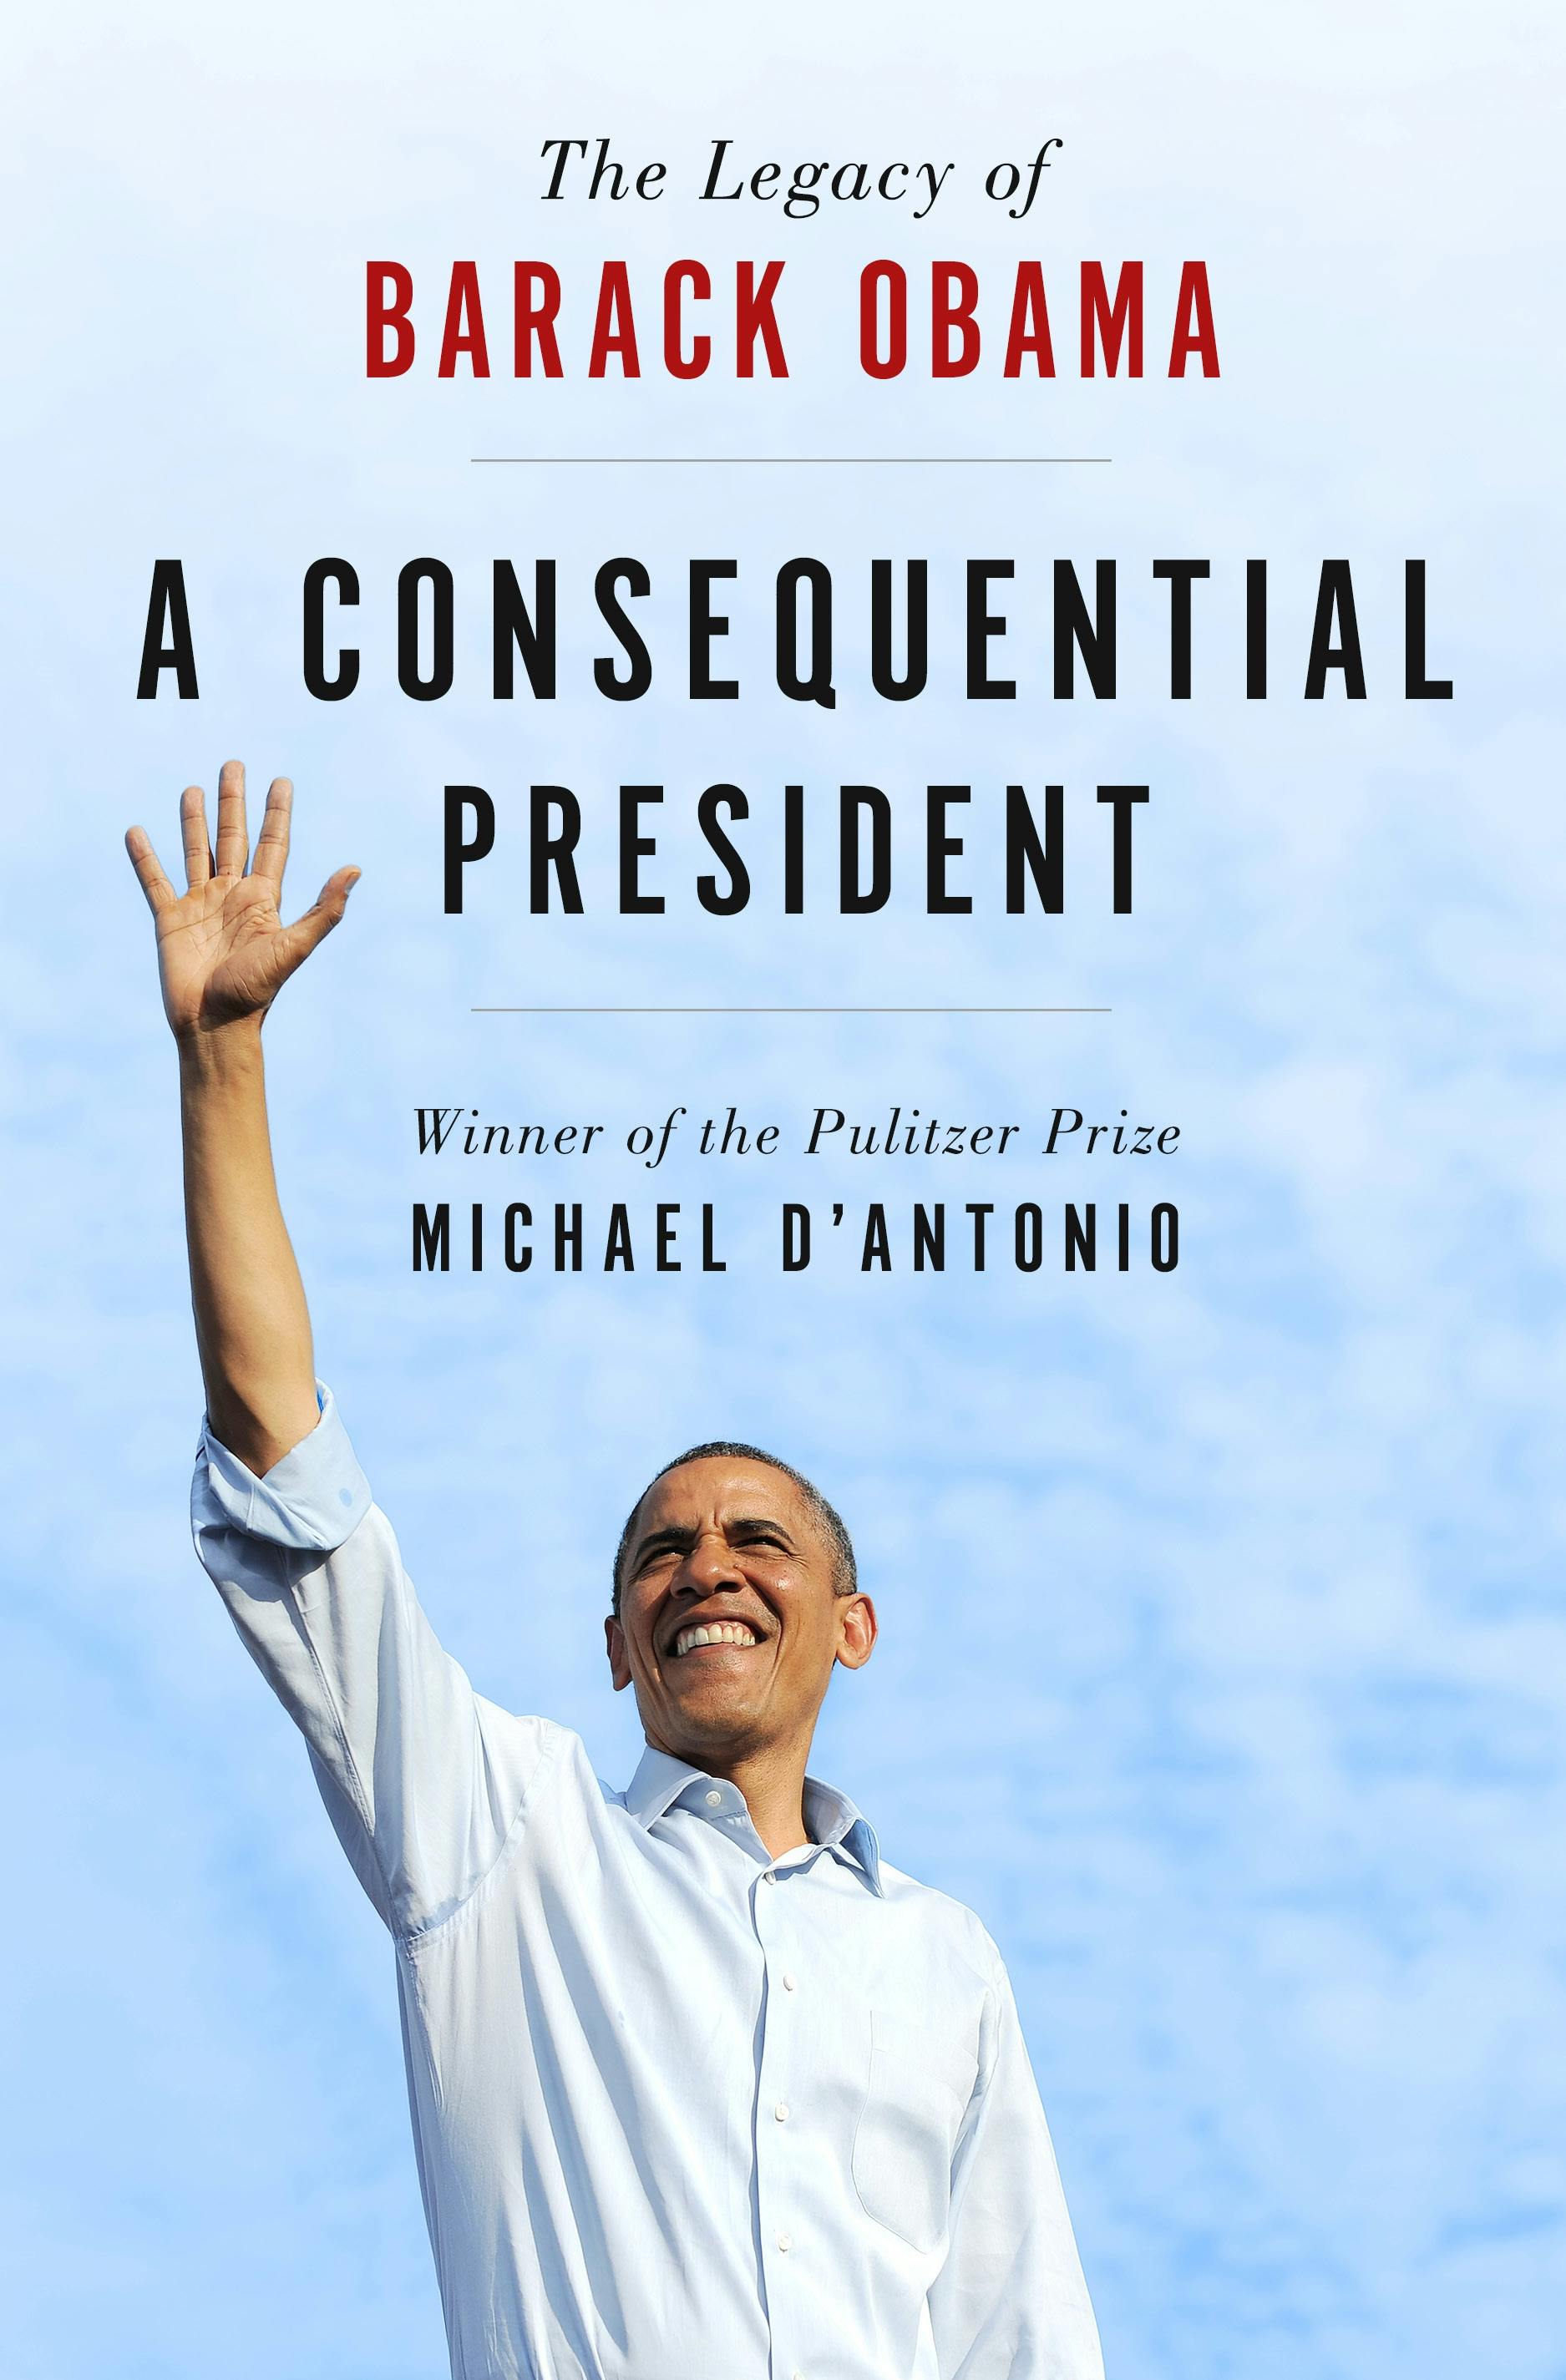 Book Club Questions and Discussion for A Promised Land by Barack Obama -  Book Club Chat